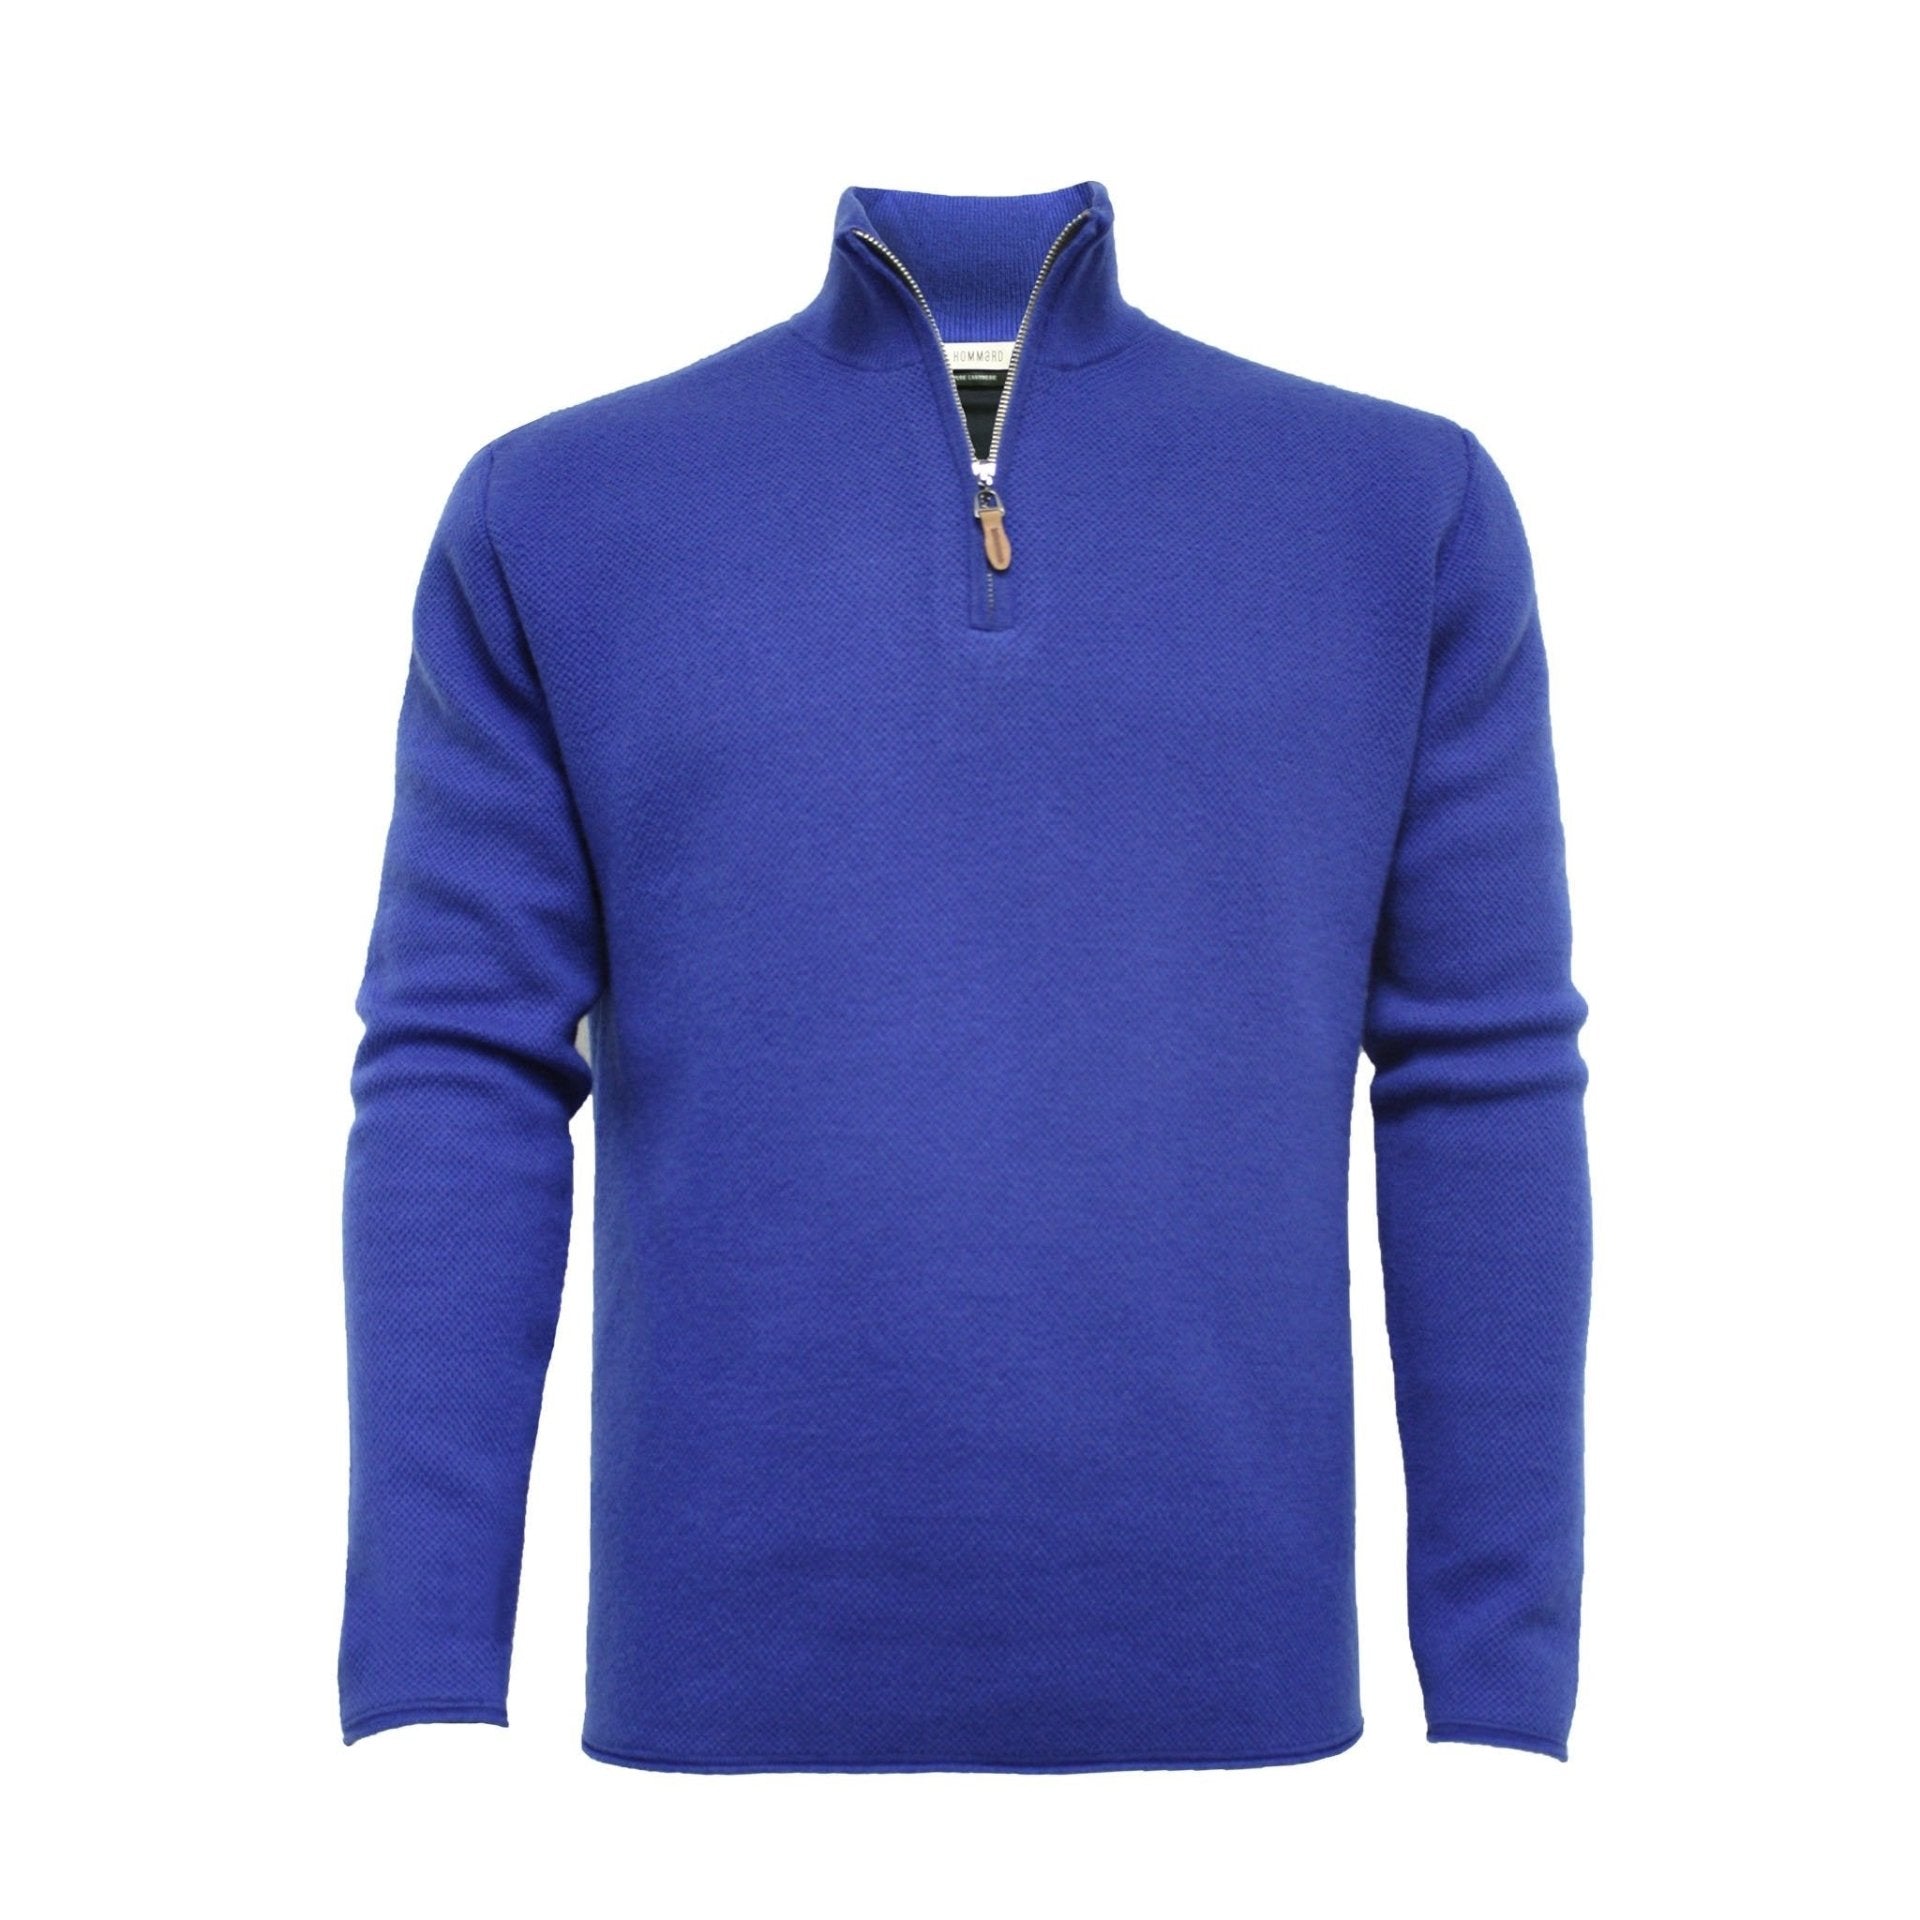 Cashmere fully Lined Golf Sweater half zip Orion - Mervyns